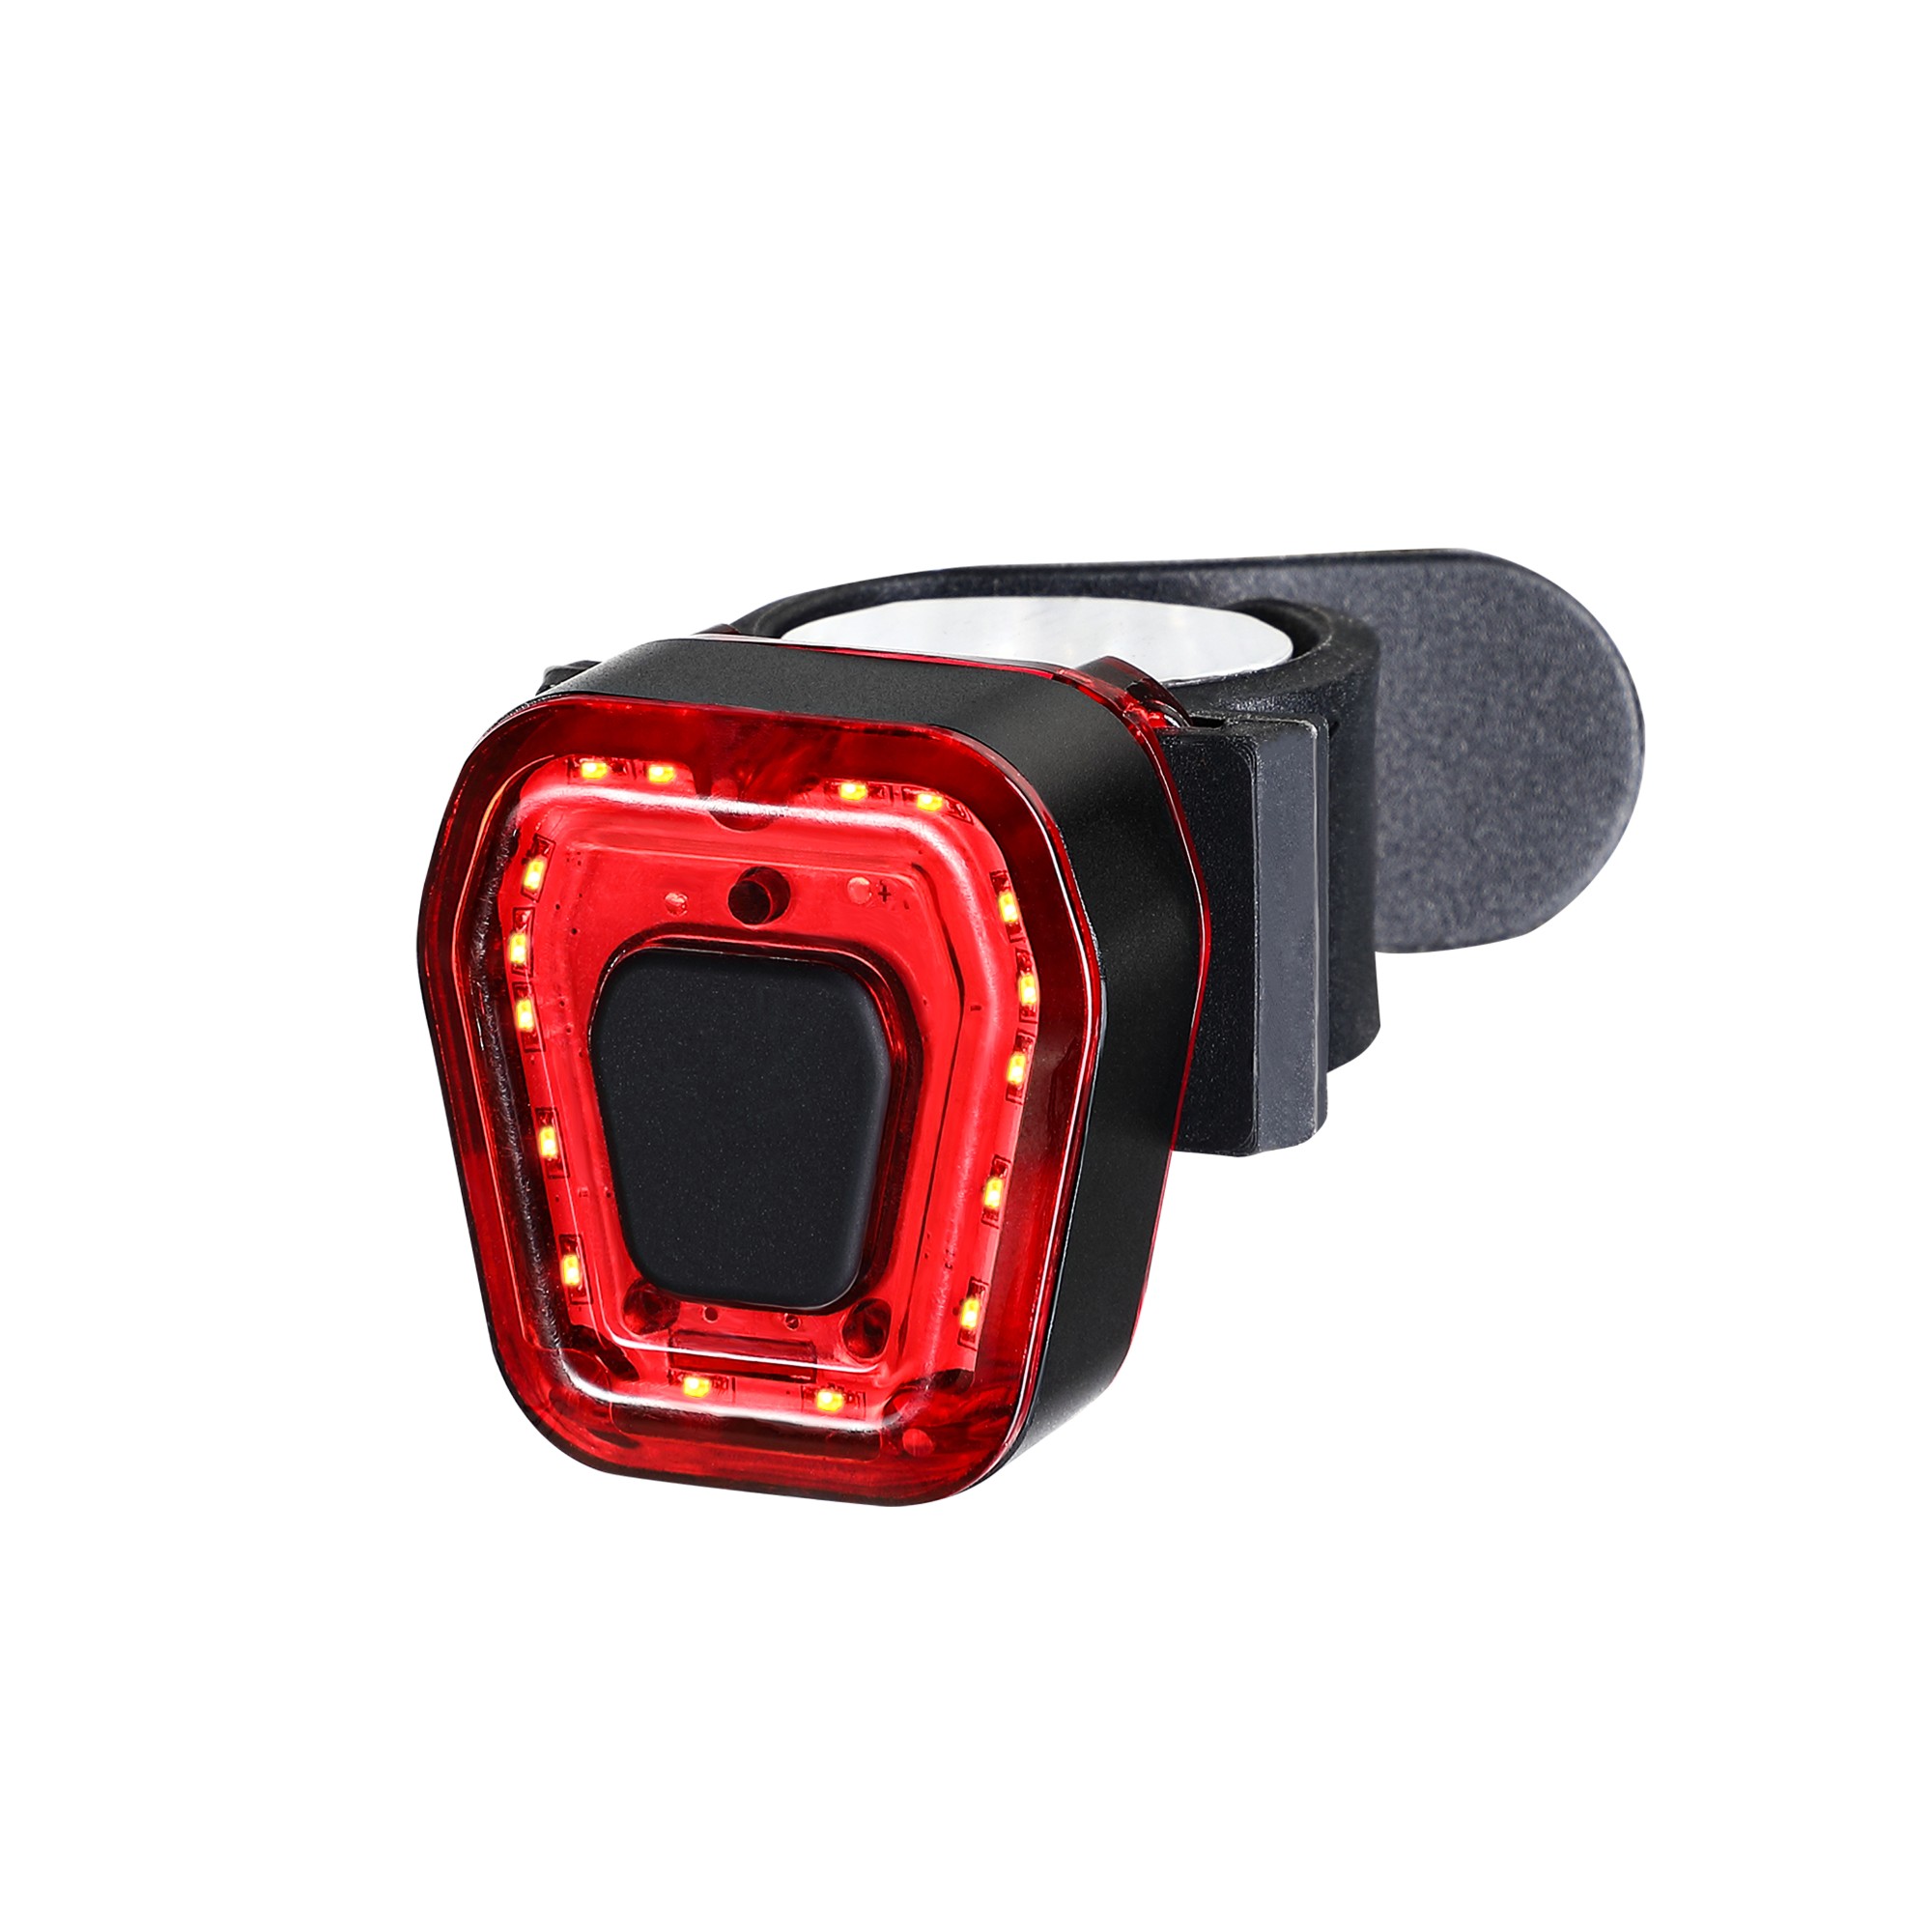 USB Rechargeable bike tail light BC-TL5553